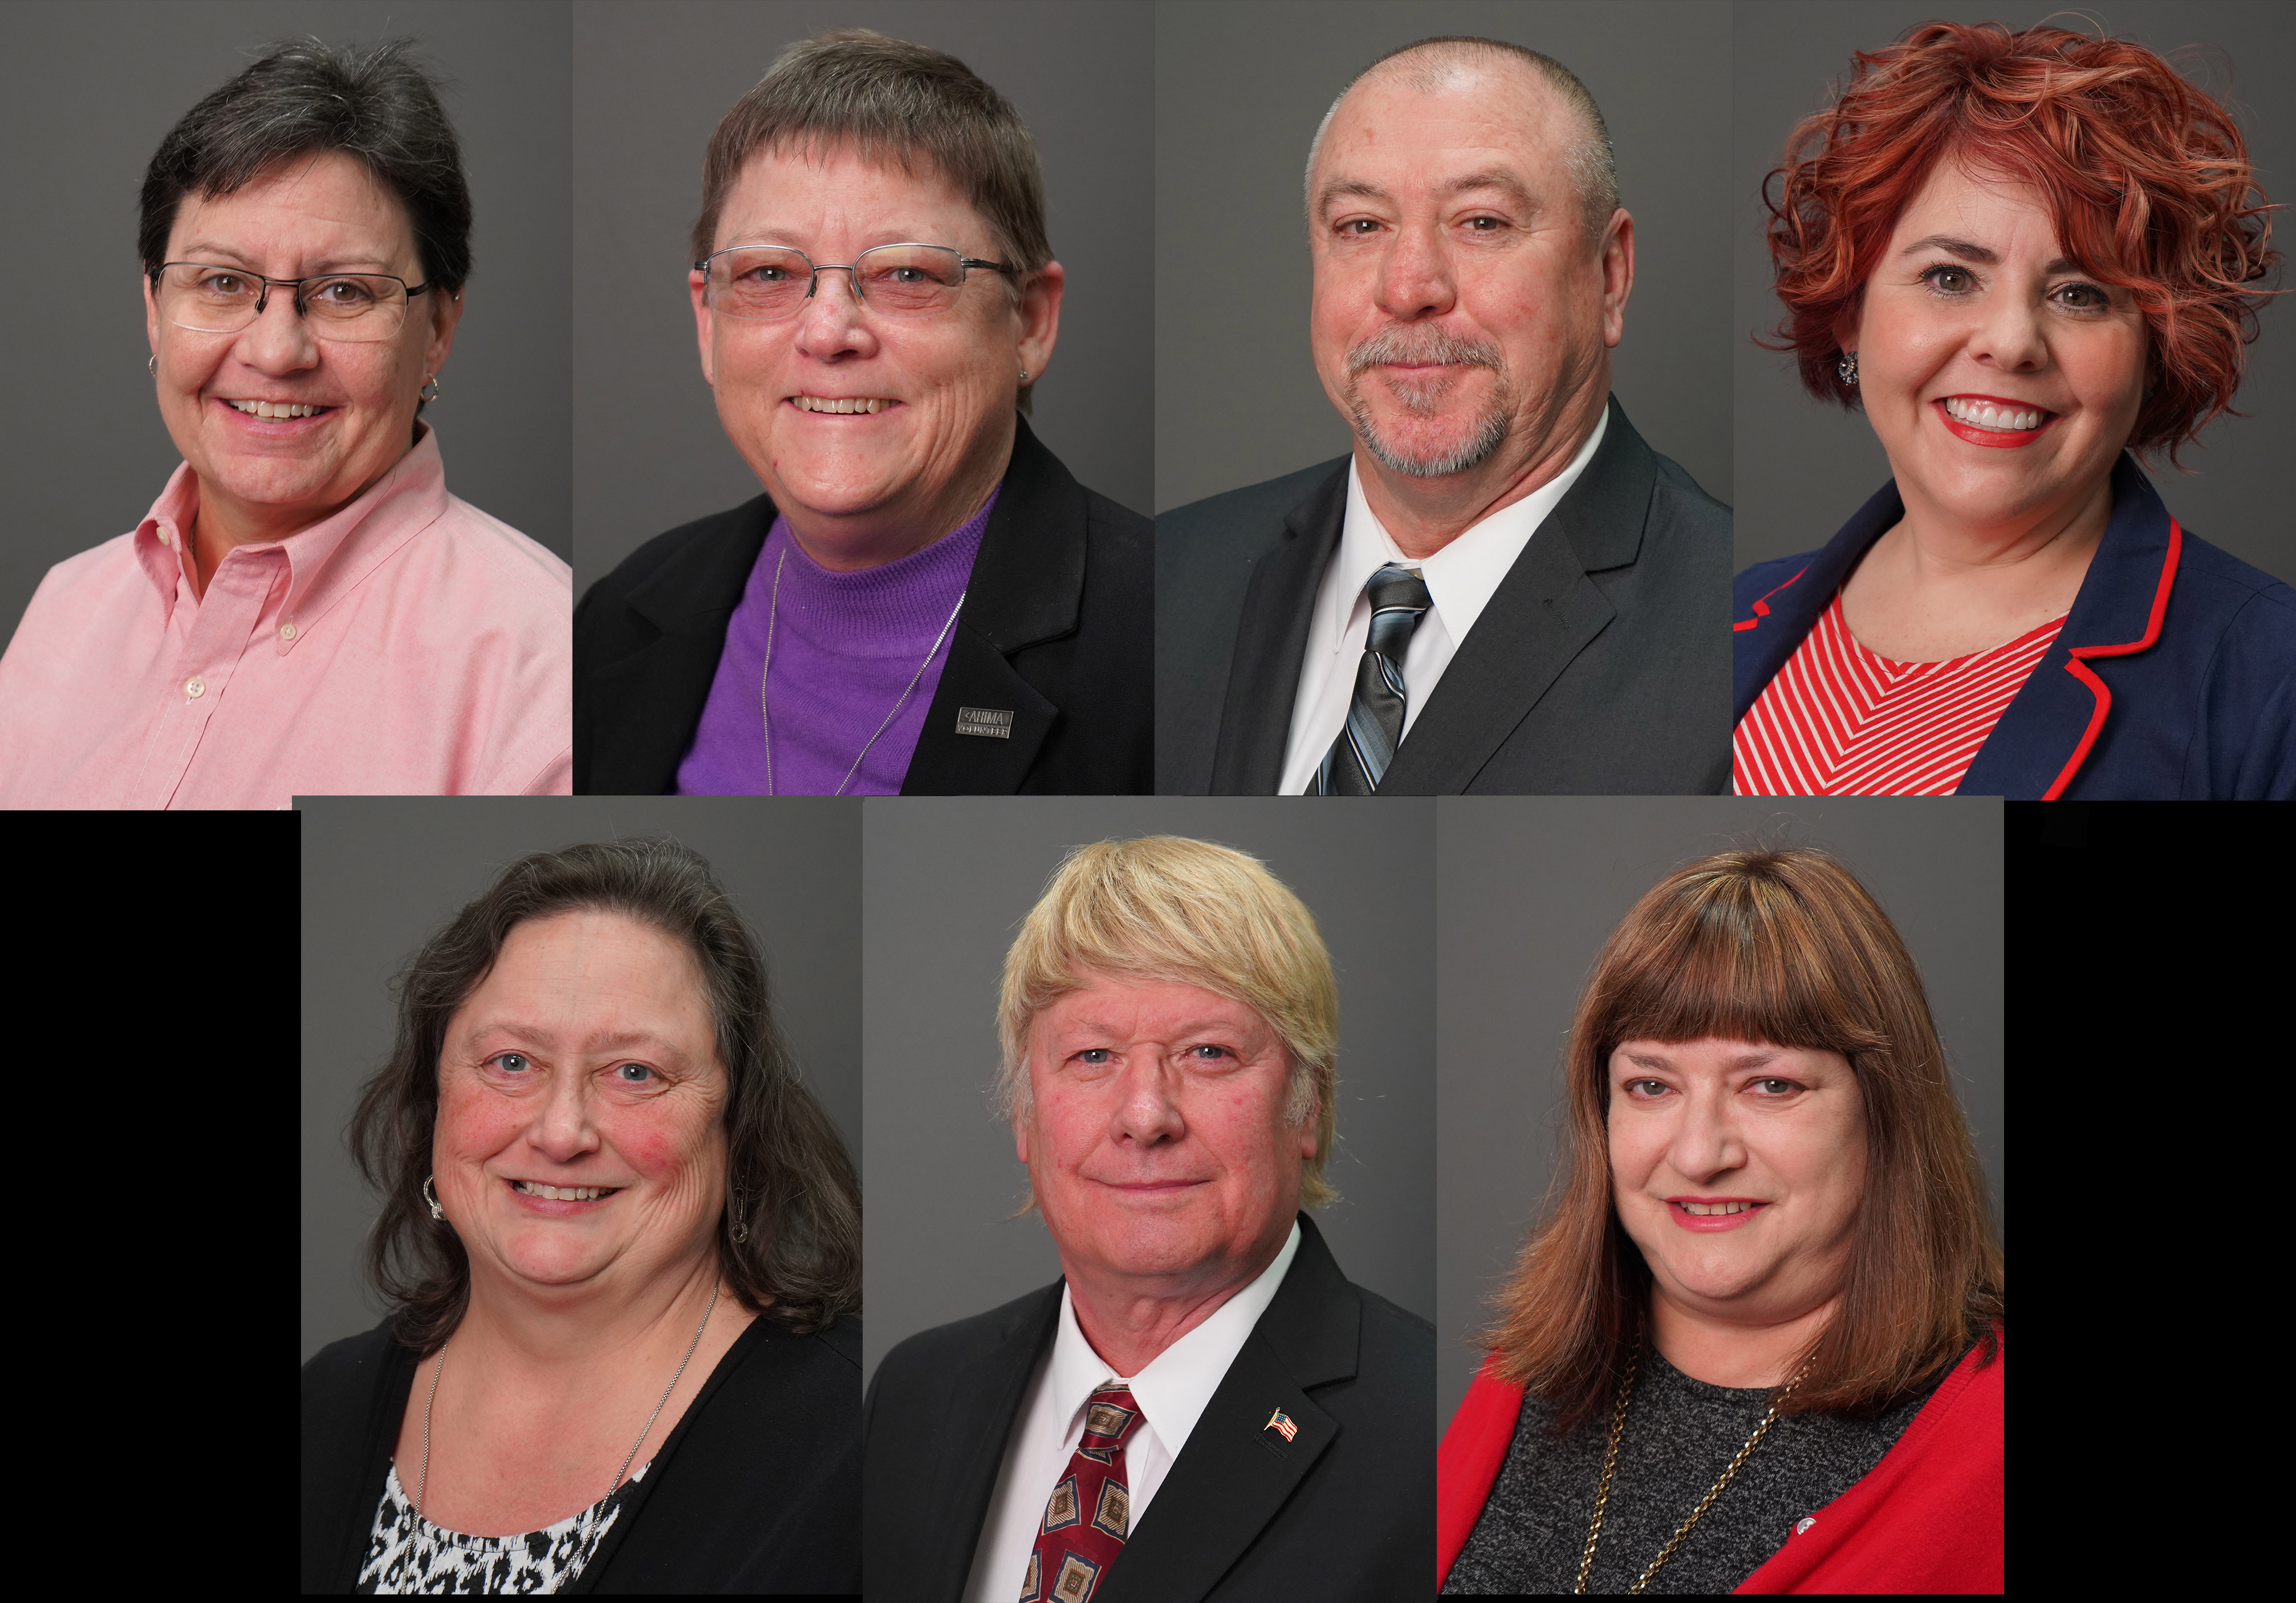 The nominees for the 2020 Rick Perkins Award are (top from left to right) Susan Bowman, Donna Estes, Wayne Henderson, Mandy Jones, (bottom from left to right) Gina Stephens, Dick Tanner and Tracy Wimberley.